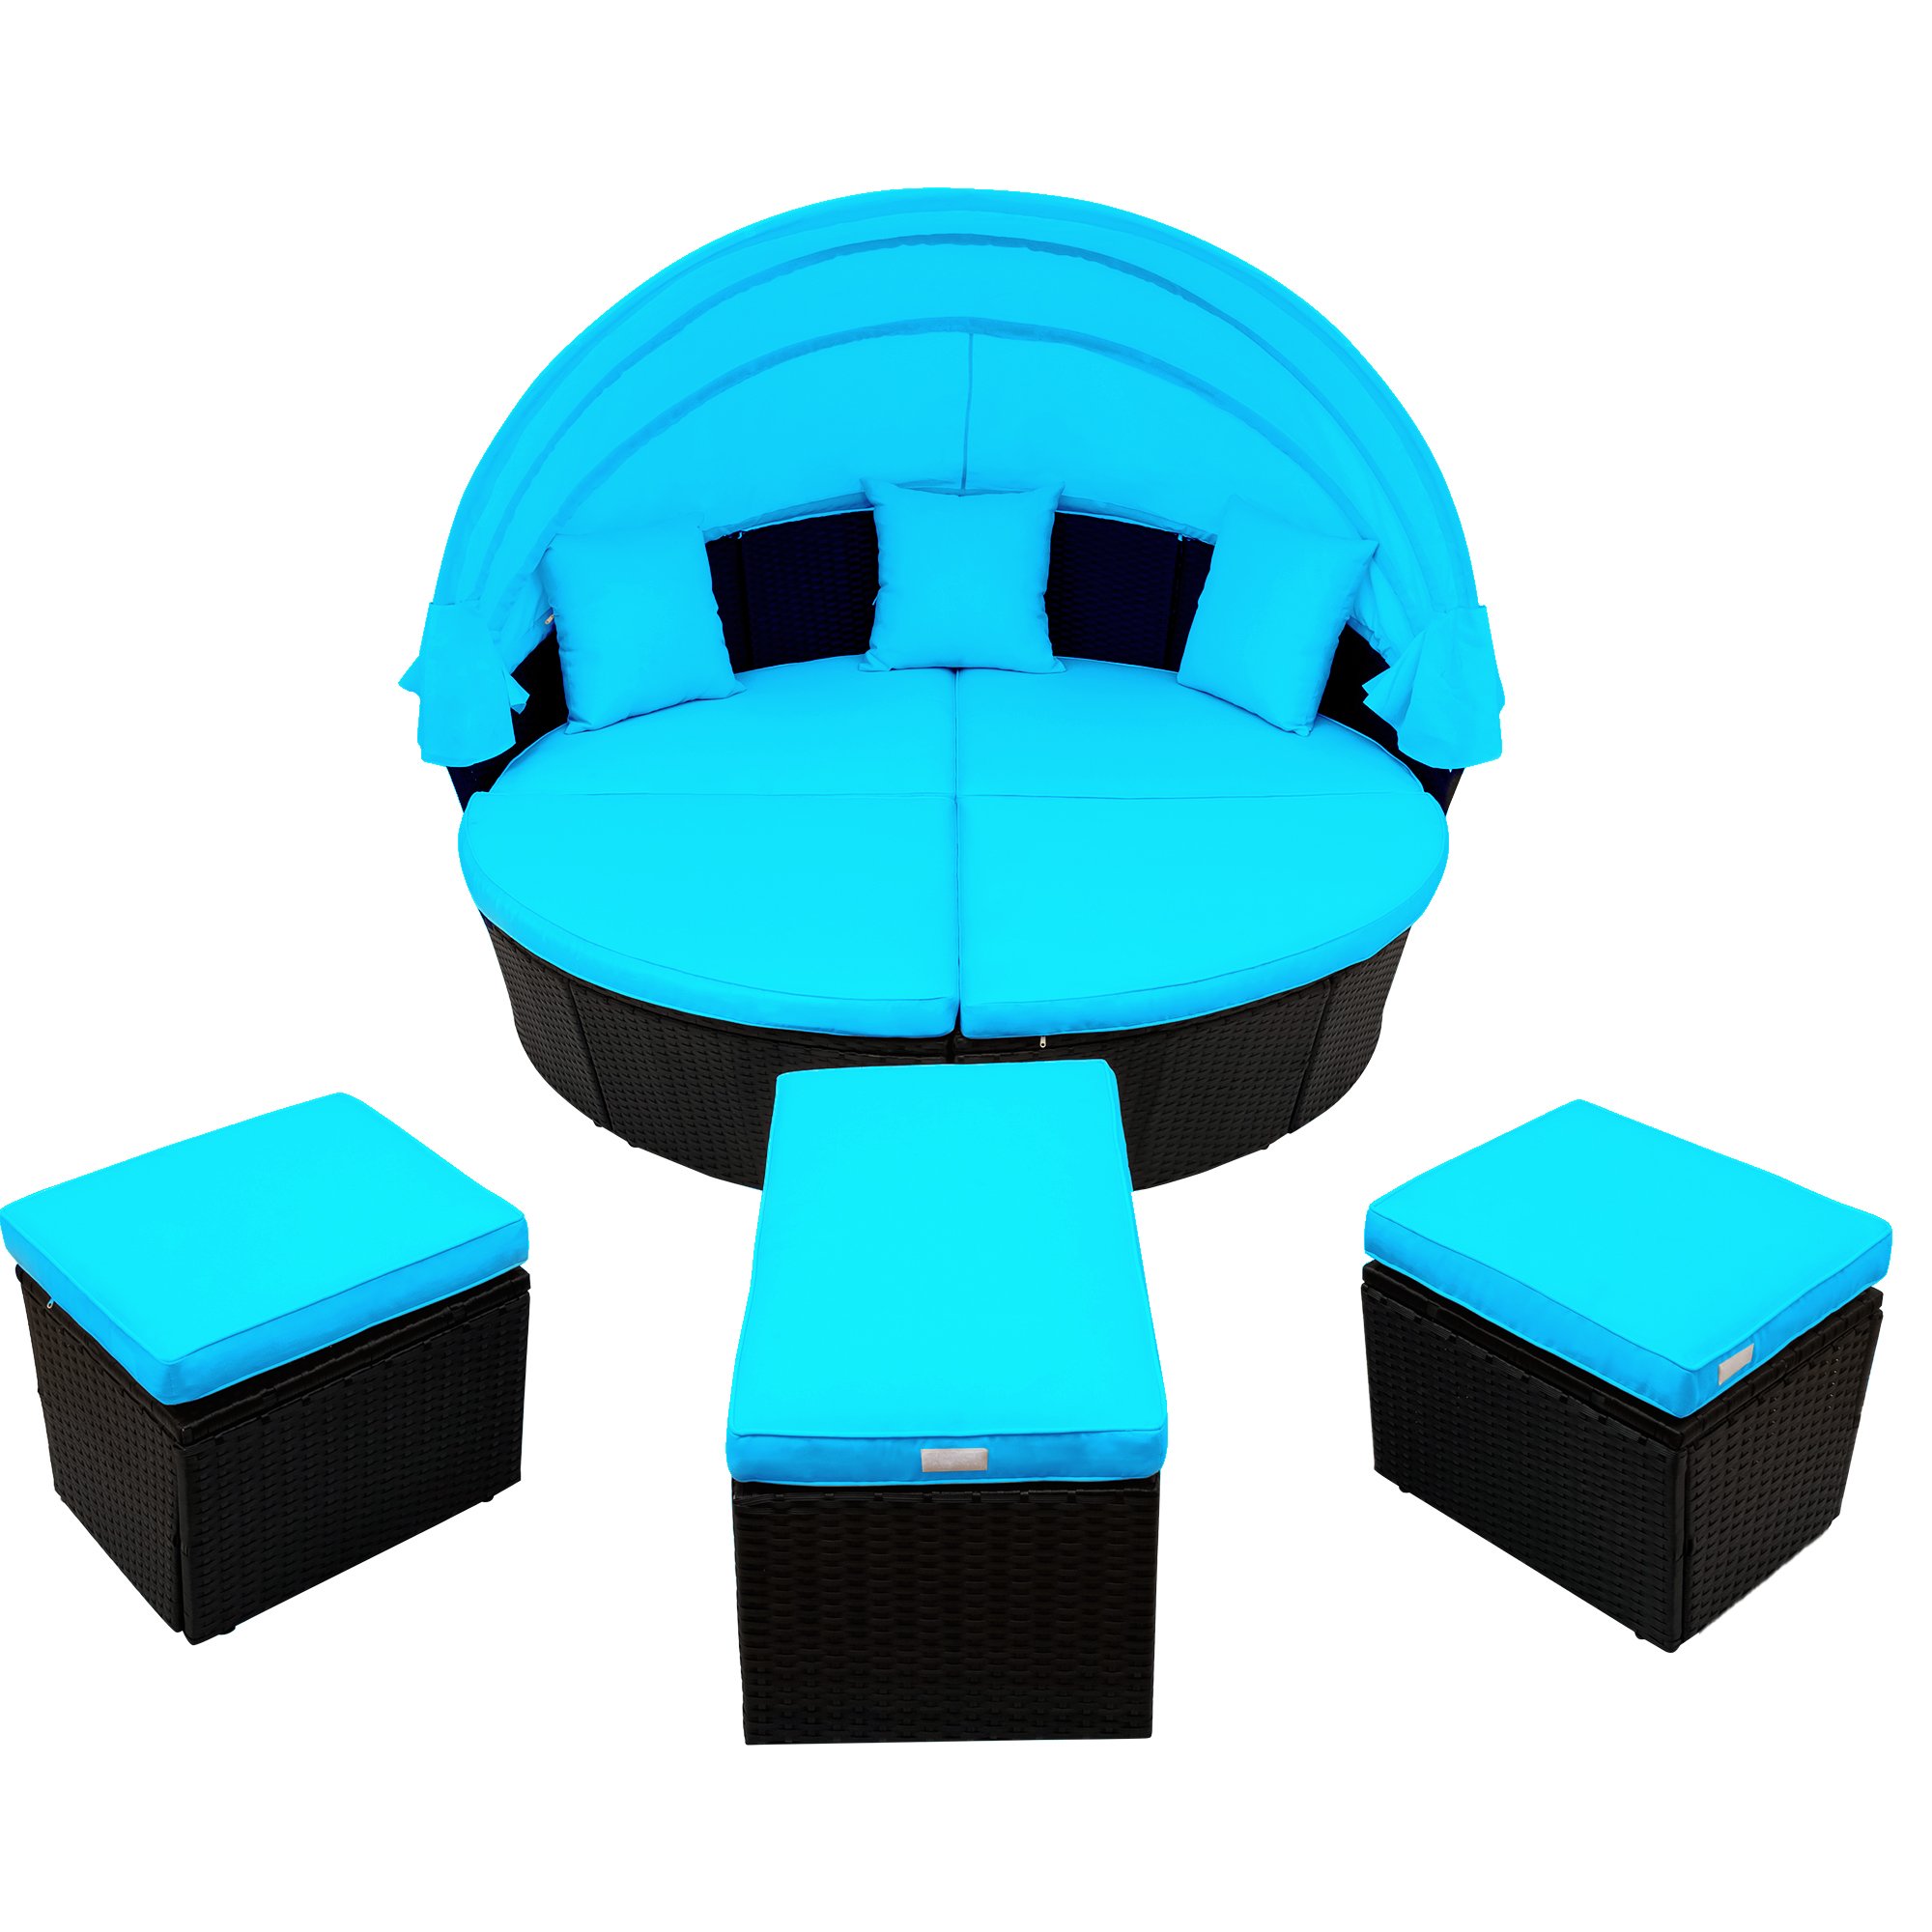 Canddidliike Outdoor Lounge Round Sofa Set w/Blue Cushions for Patio Sectional Furniture - Black Wicker - image 3 of 10